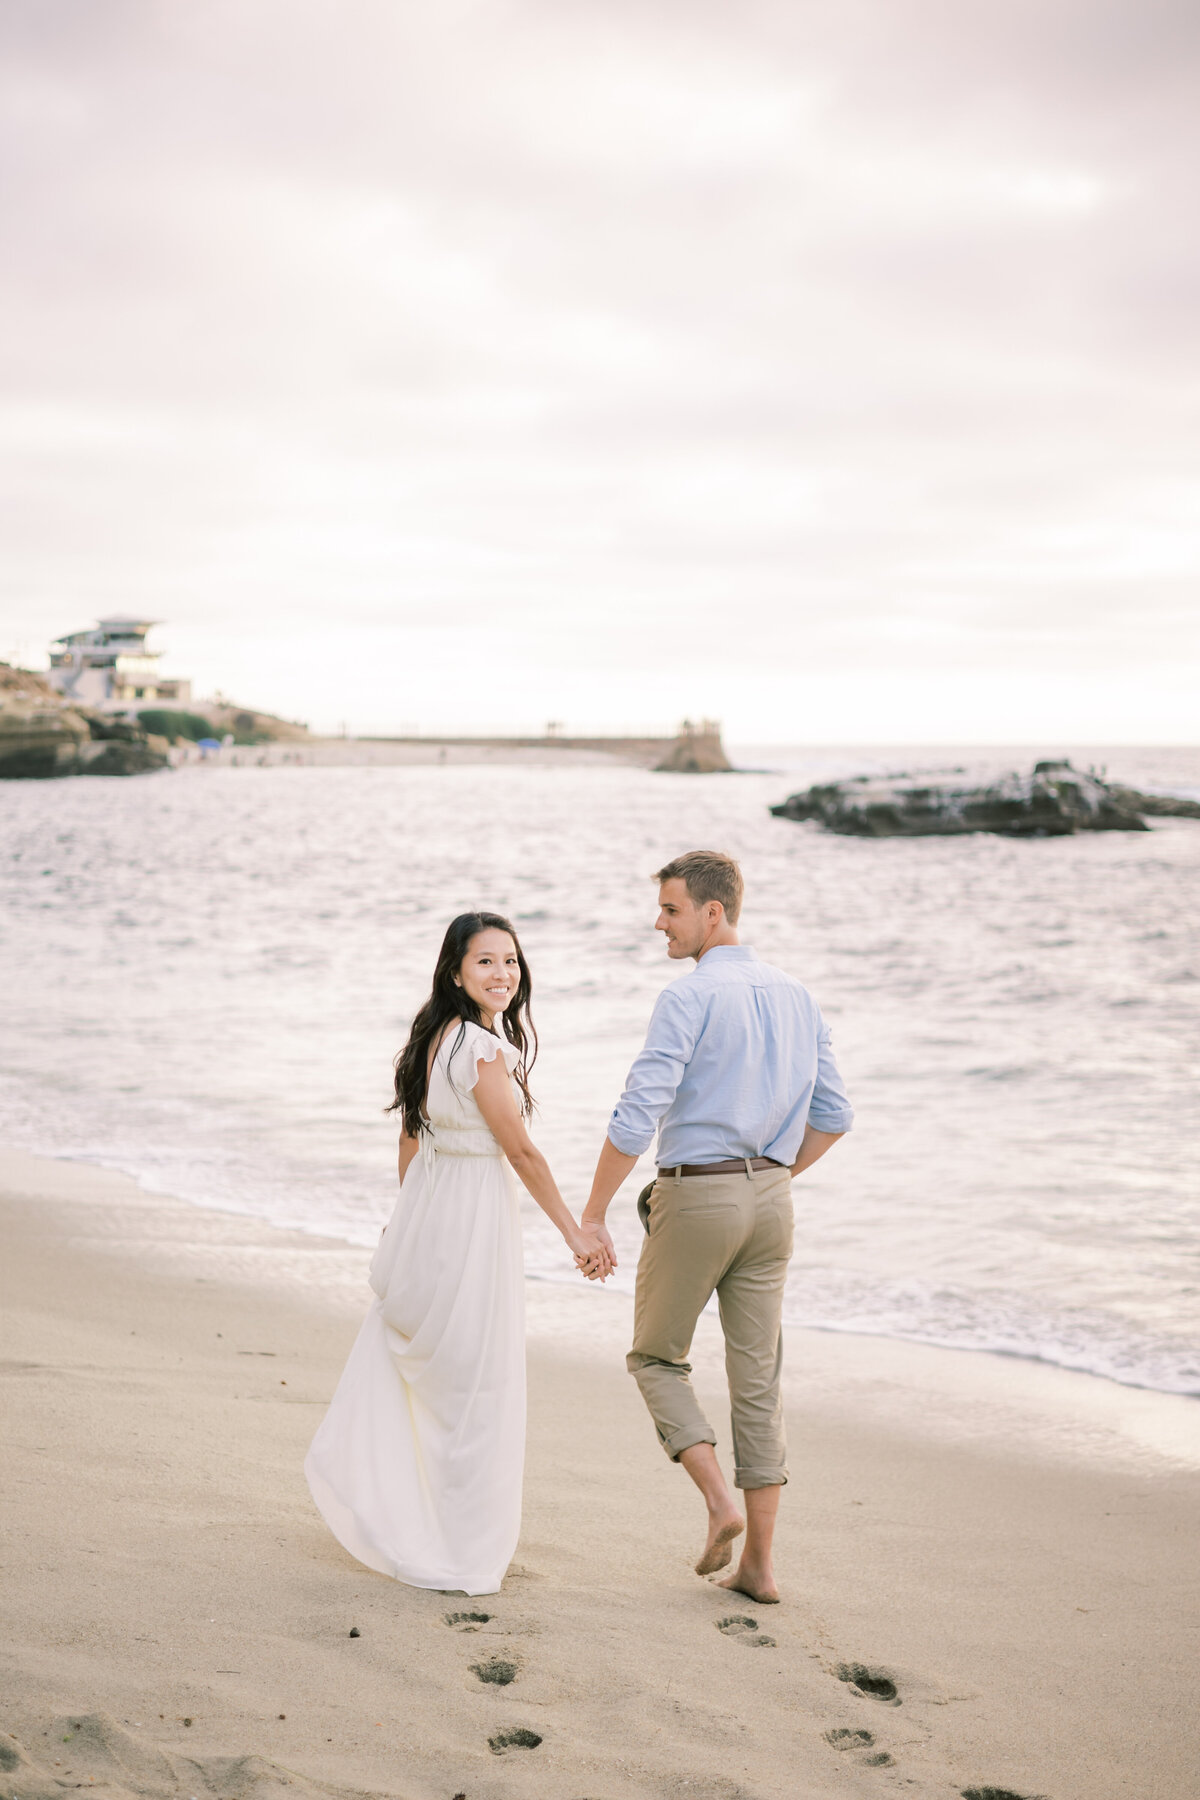 Jocelyn and Spencer Photography California Santa Barbara Wedding Engagement Luxury High End Romantic Imagery Light Airy Fineart Film Style12